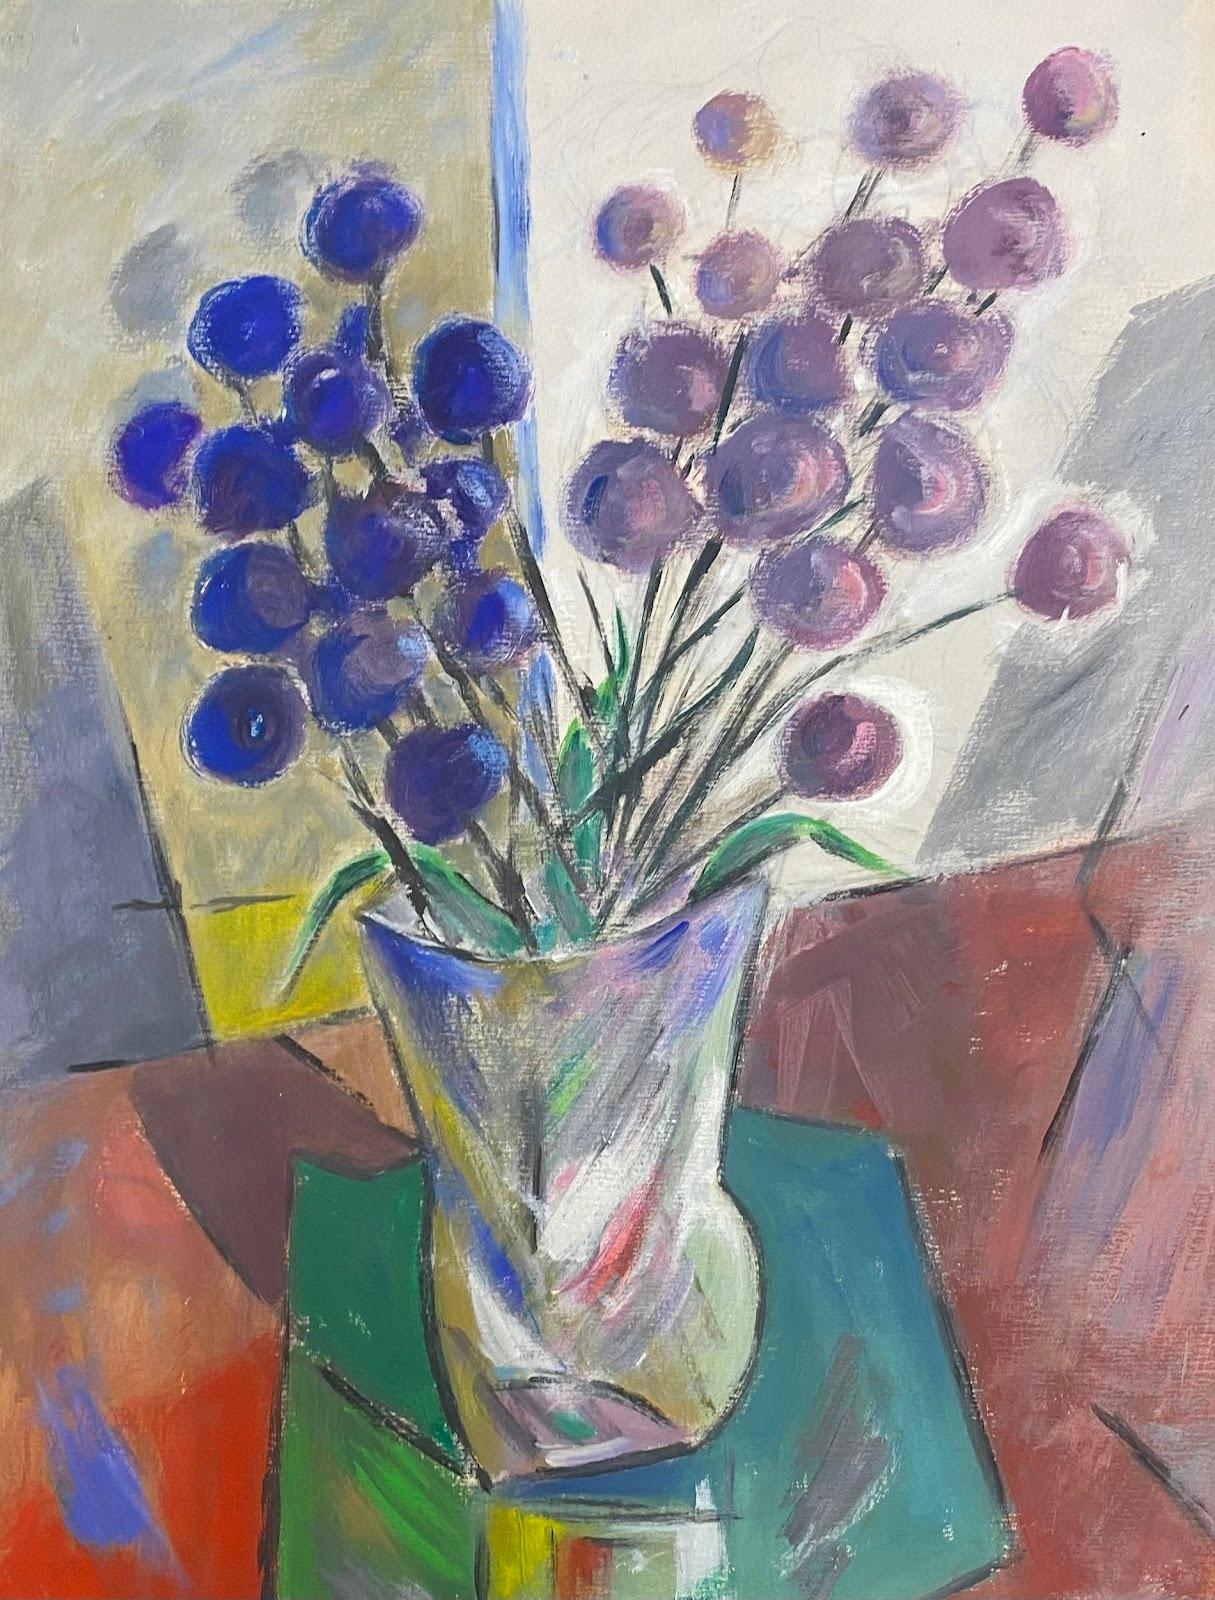 Paul-Louis Bolot (French 1918-2003) Still-Life Painting - 1960's French Painting Blue And Purple Allium Flowers Arranged In A Glass Vase